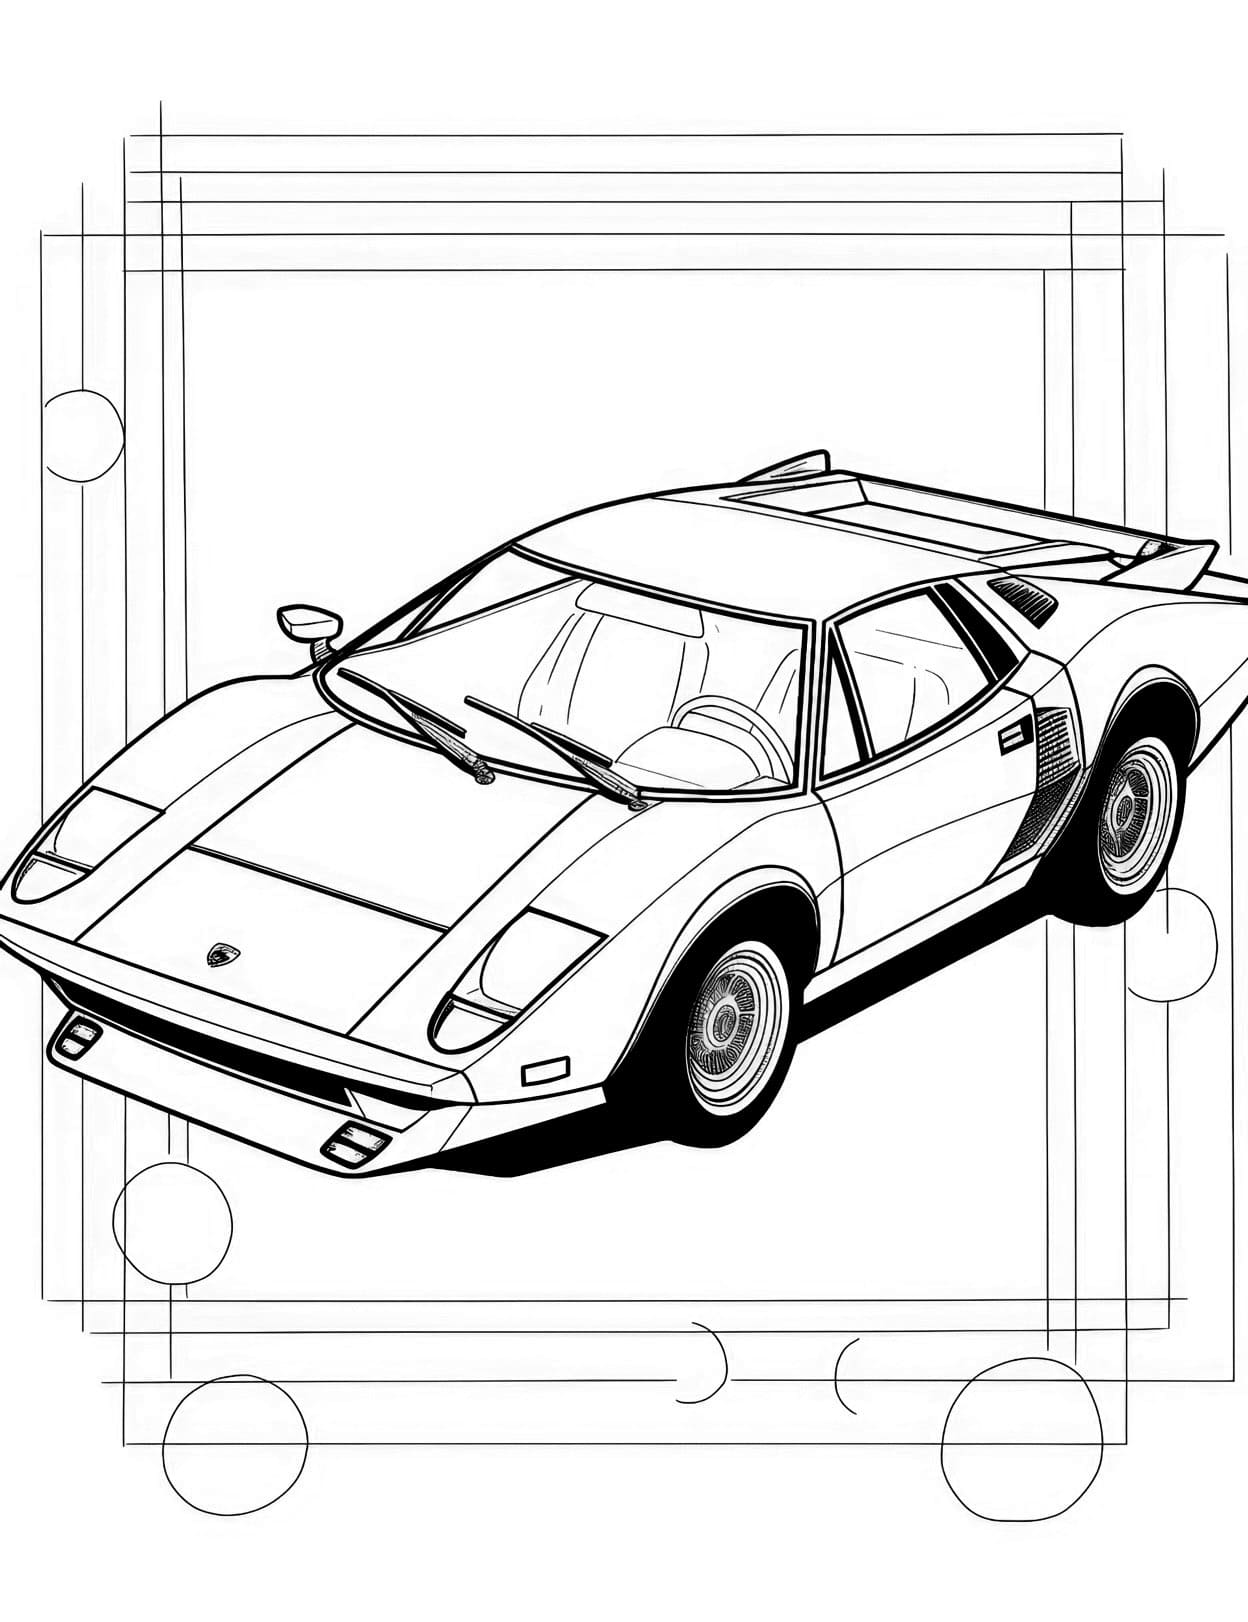 Car coloring pages for adults and kids